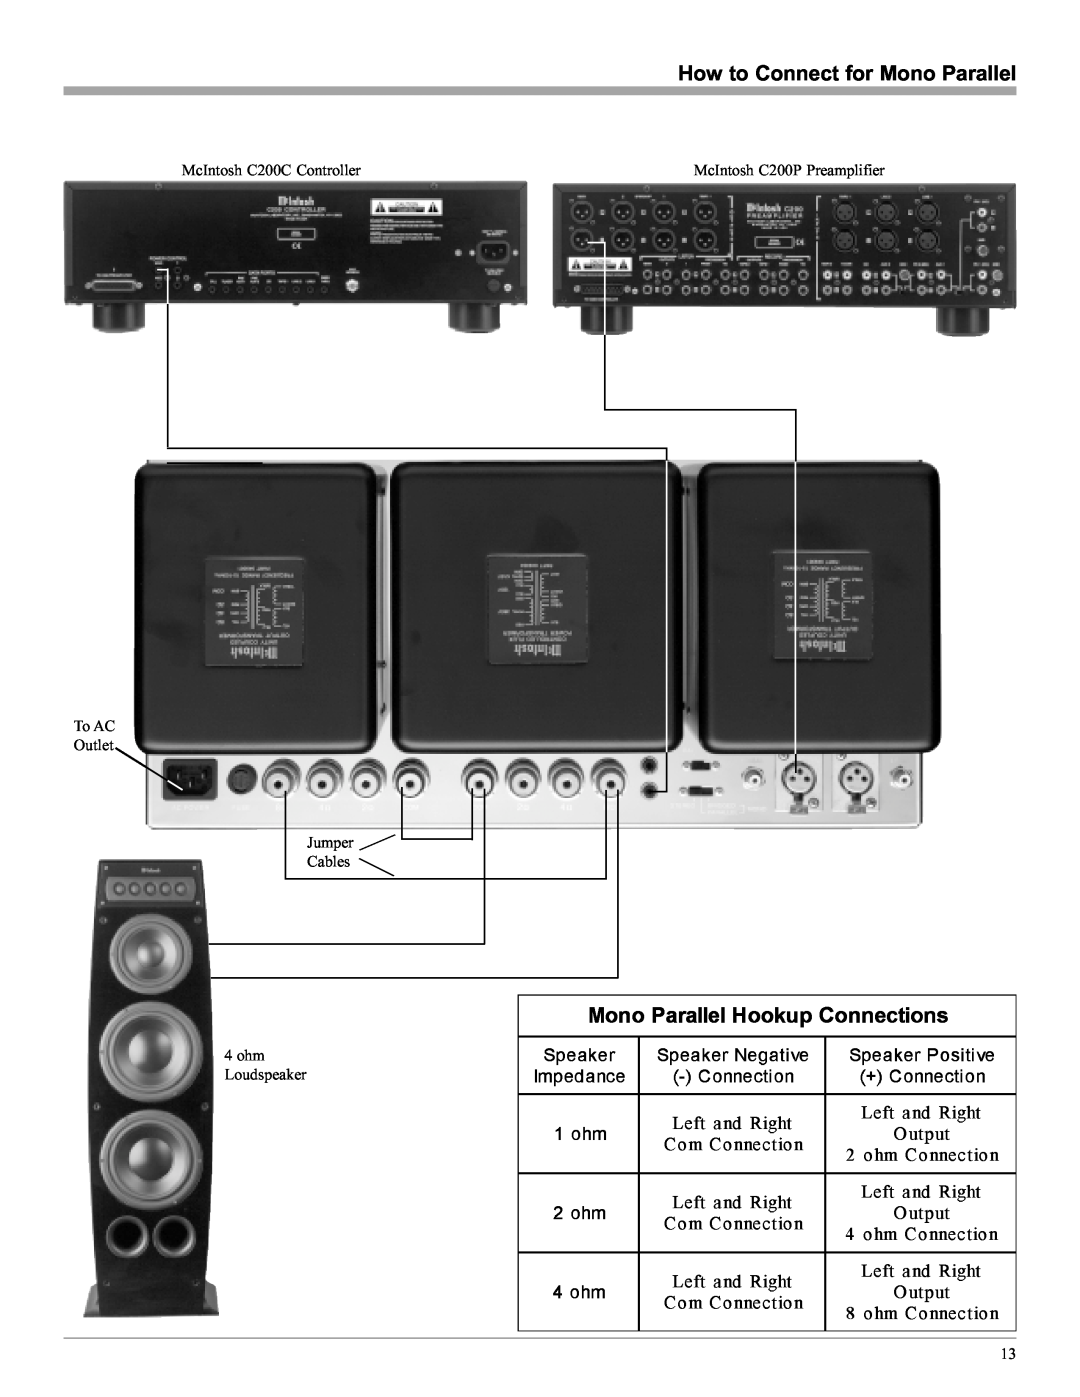 McIntosh MC2102 manual How to Connect for Mono Parallel, McIntosh C200C Controller, To AC Outlet, Jumper, Cables 